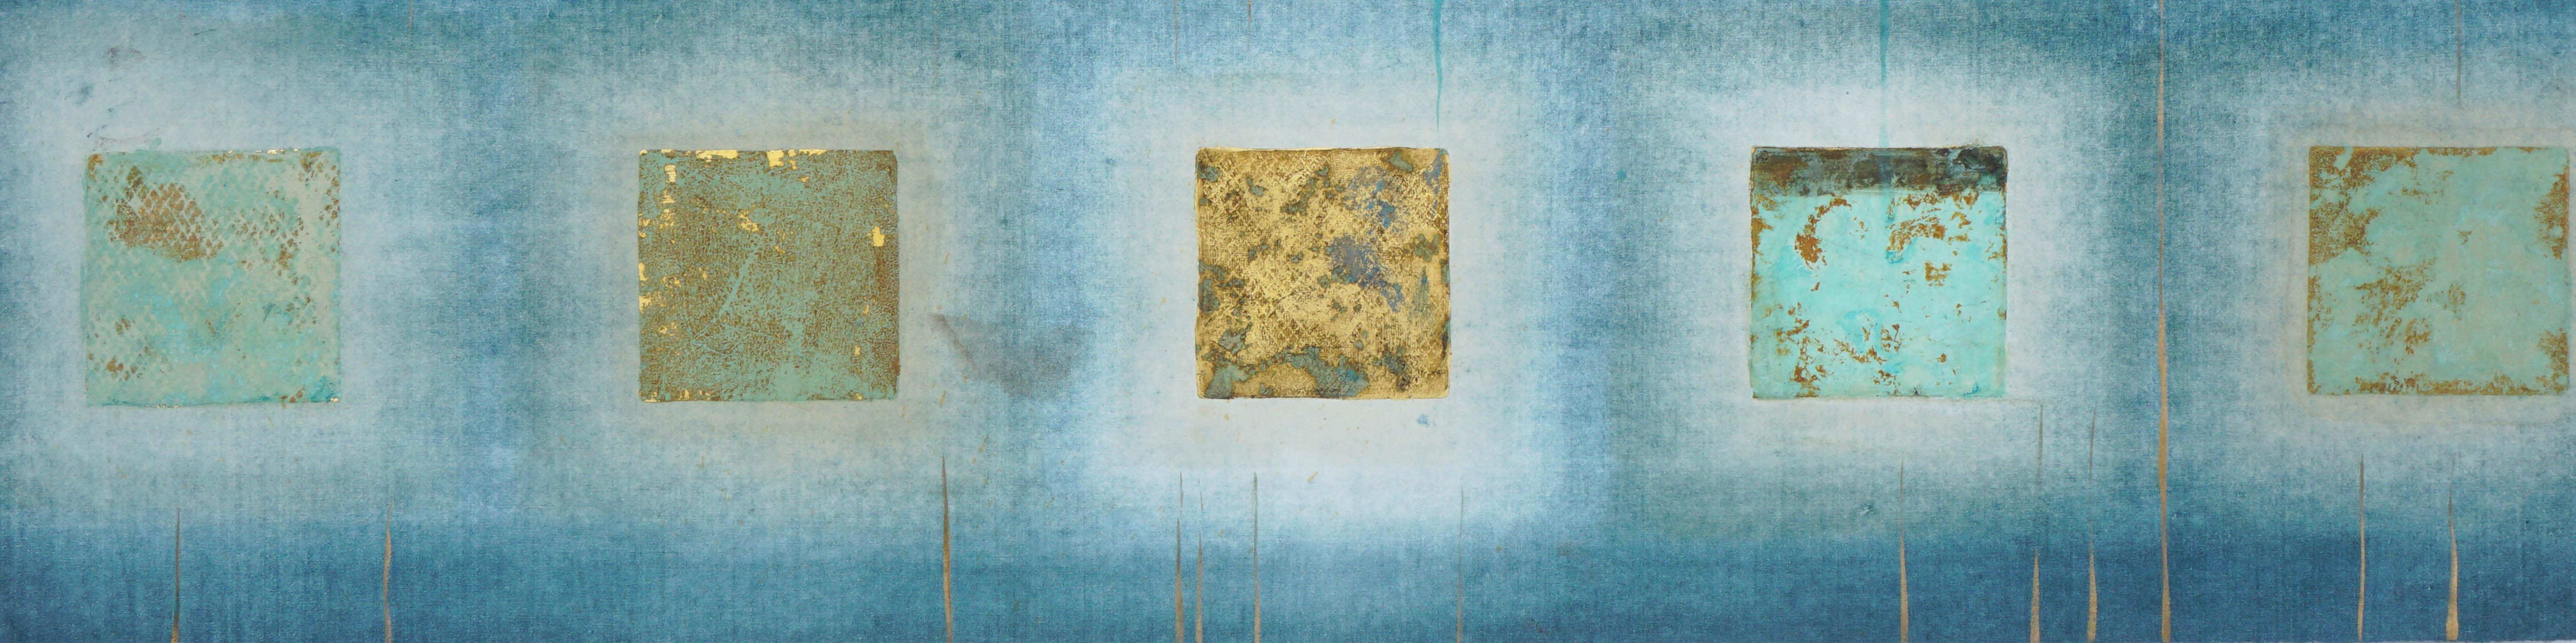 Teal and Gold Squares Collagraph  - Blue Abstract Print by Patricia A Pearce